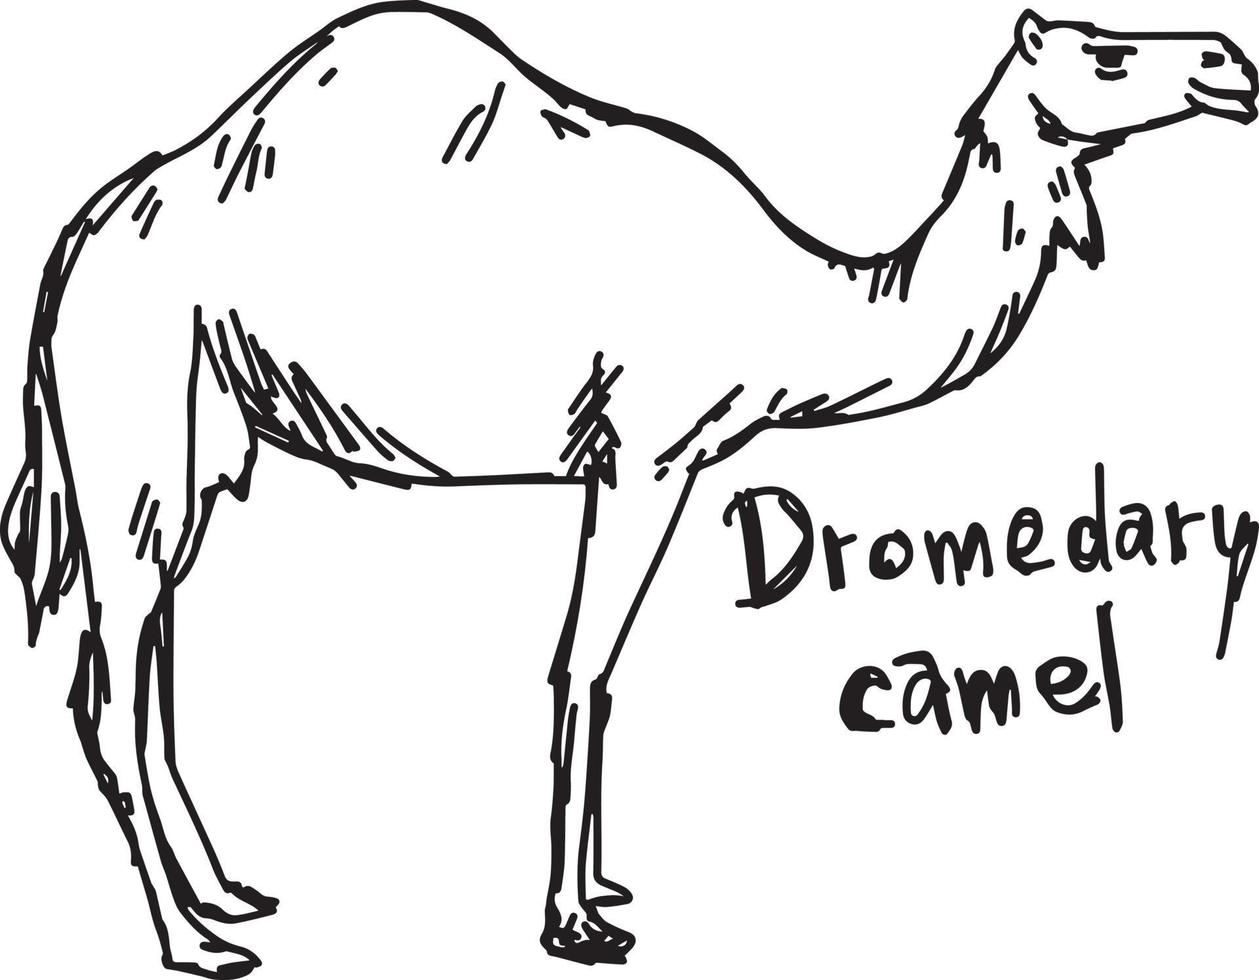 dromedary camel standing on the sand - vector